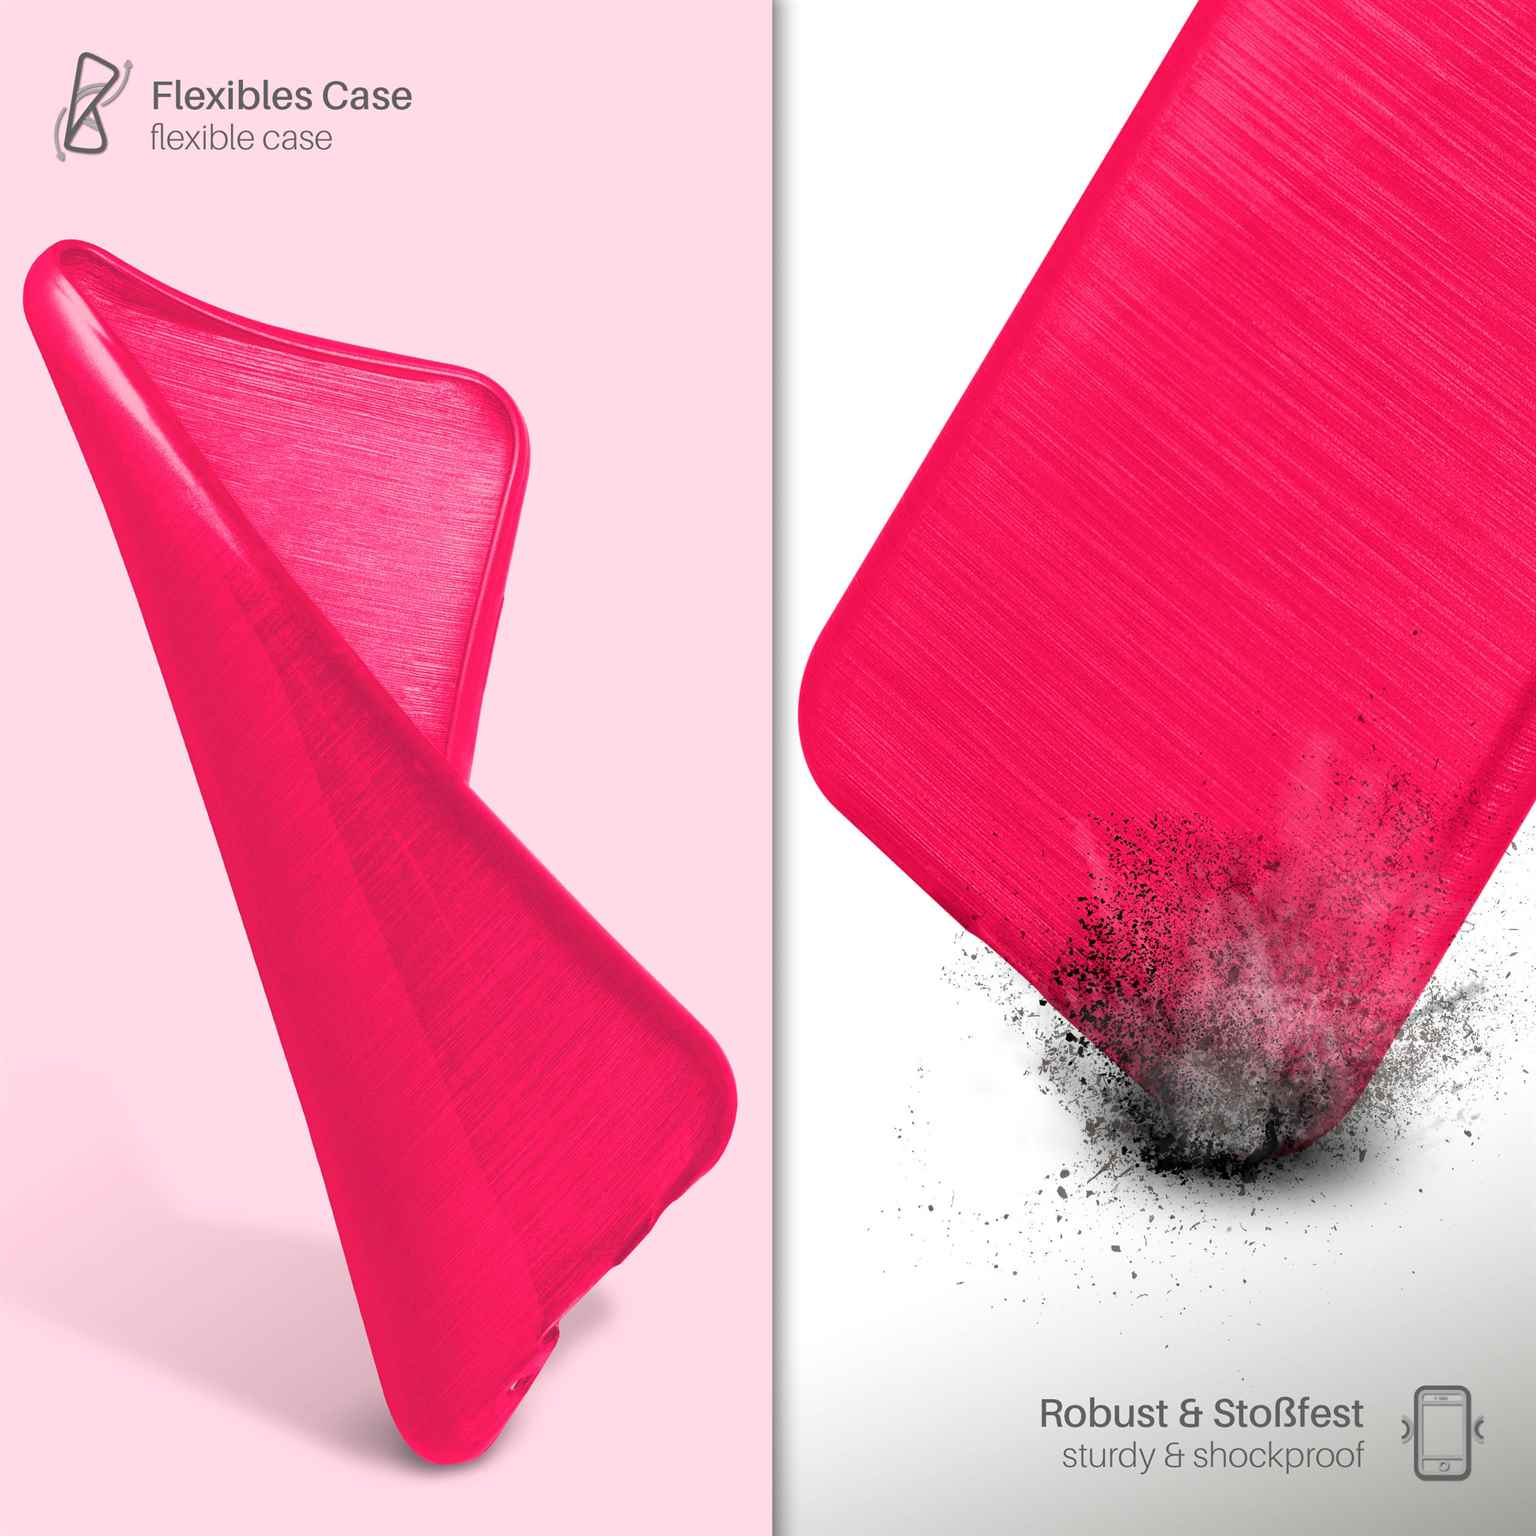 Backcover, S8, Magenta-Pink Brushed MOEX Samsung, Case, Galaxy